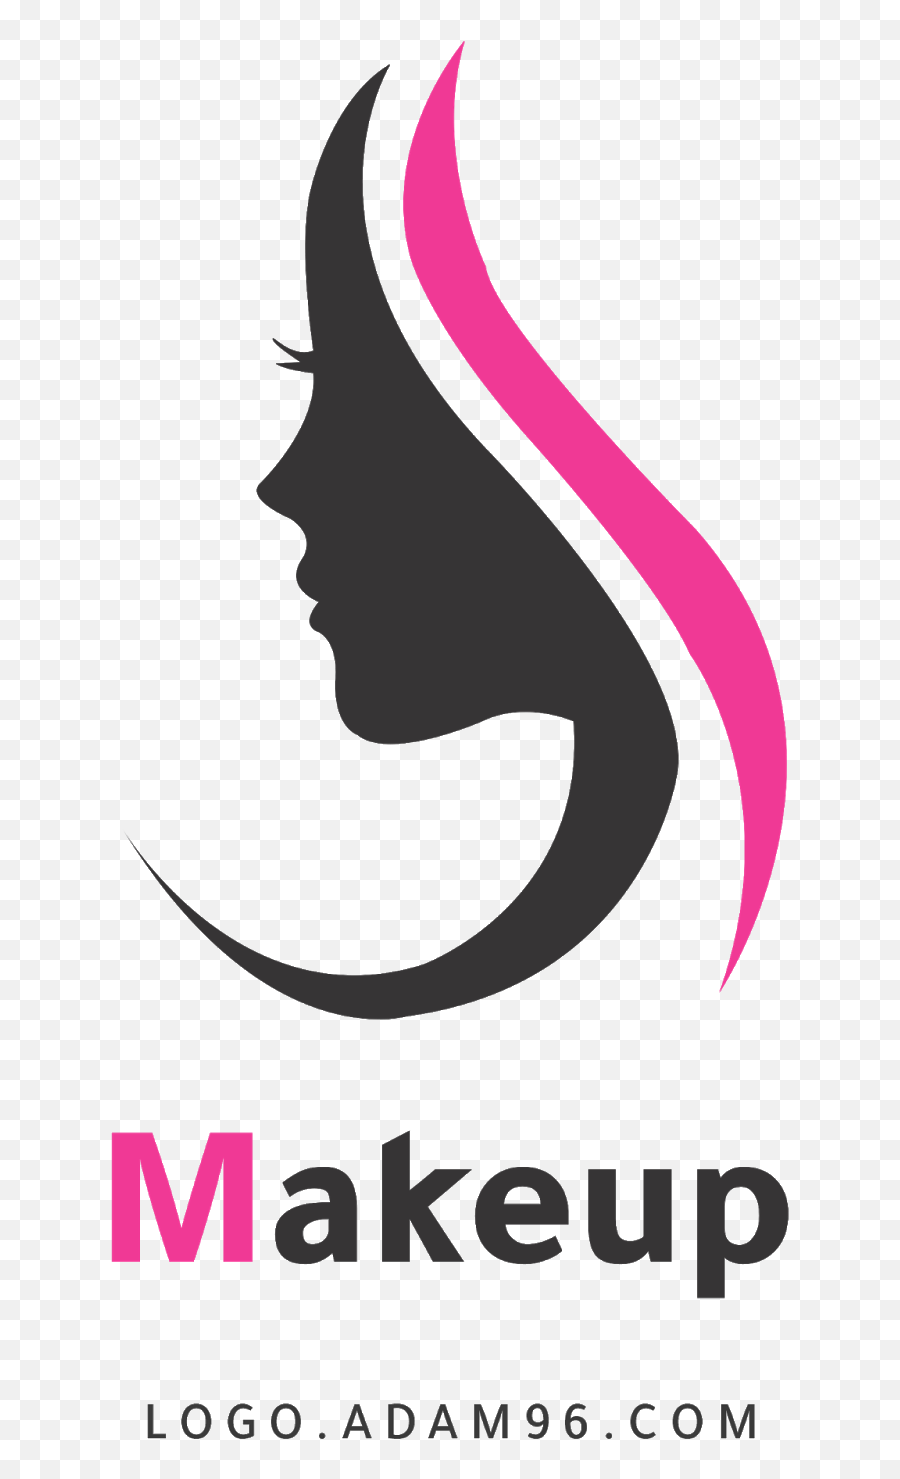 Download Logo Makeup Without Rights Psd High Quality Free - Vertical Png,Yakuza 0 Logo